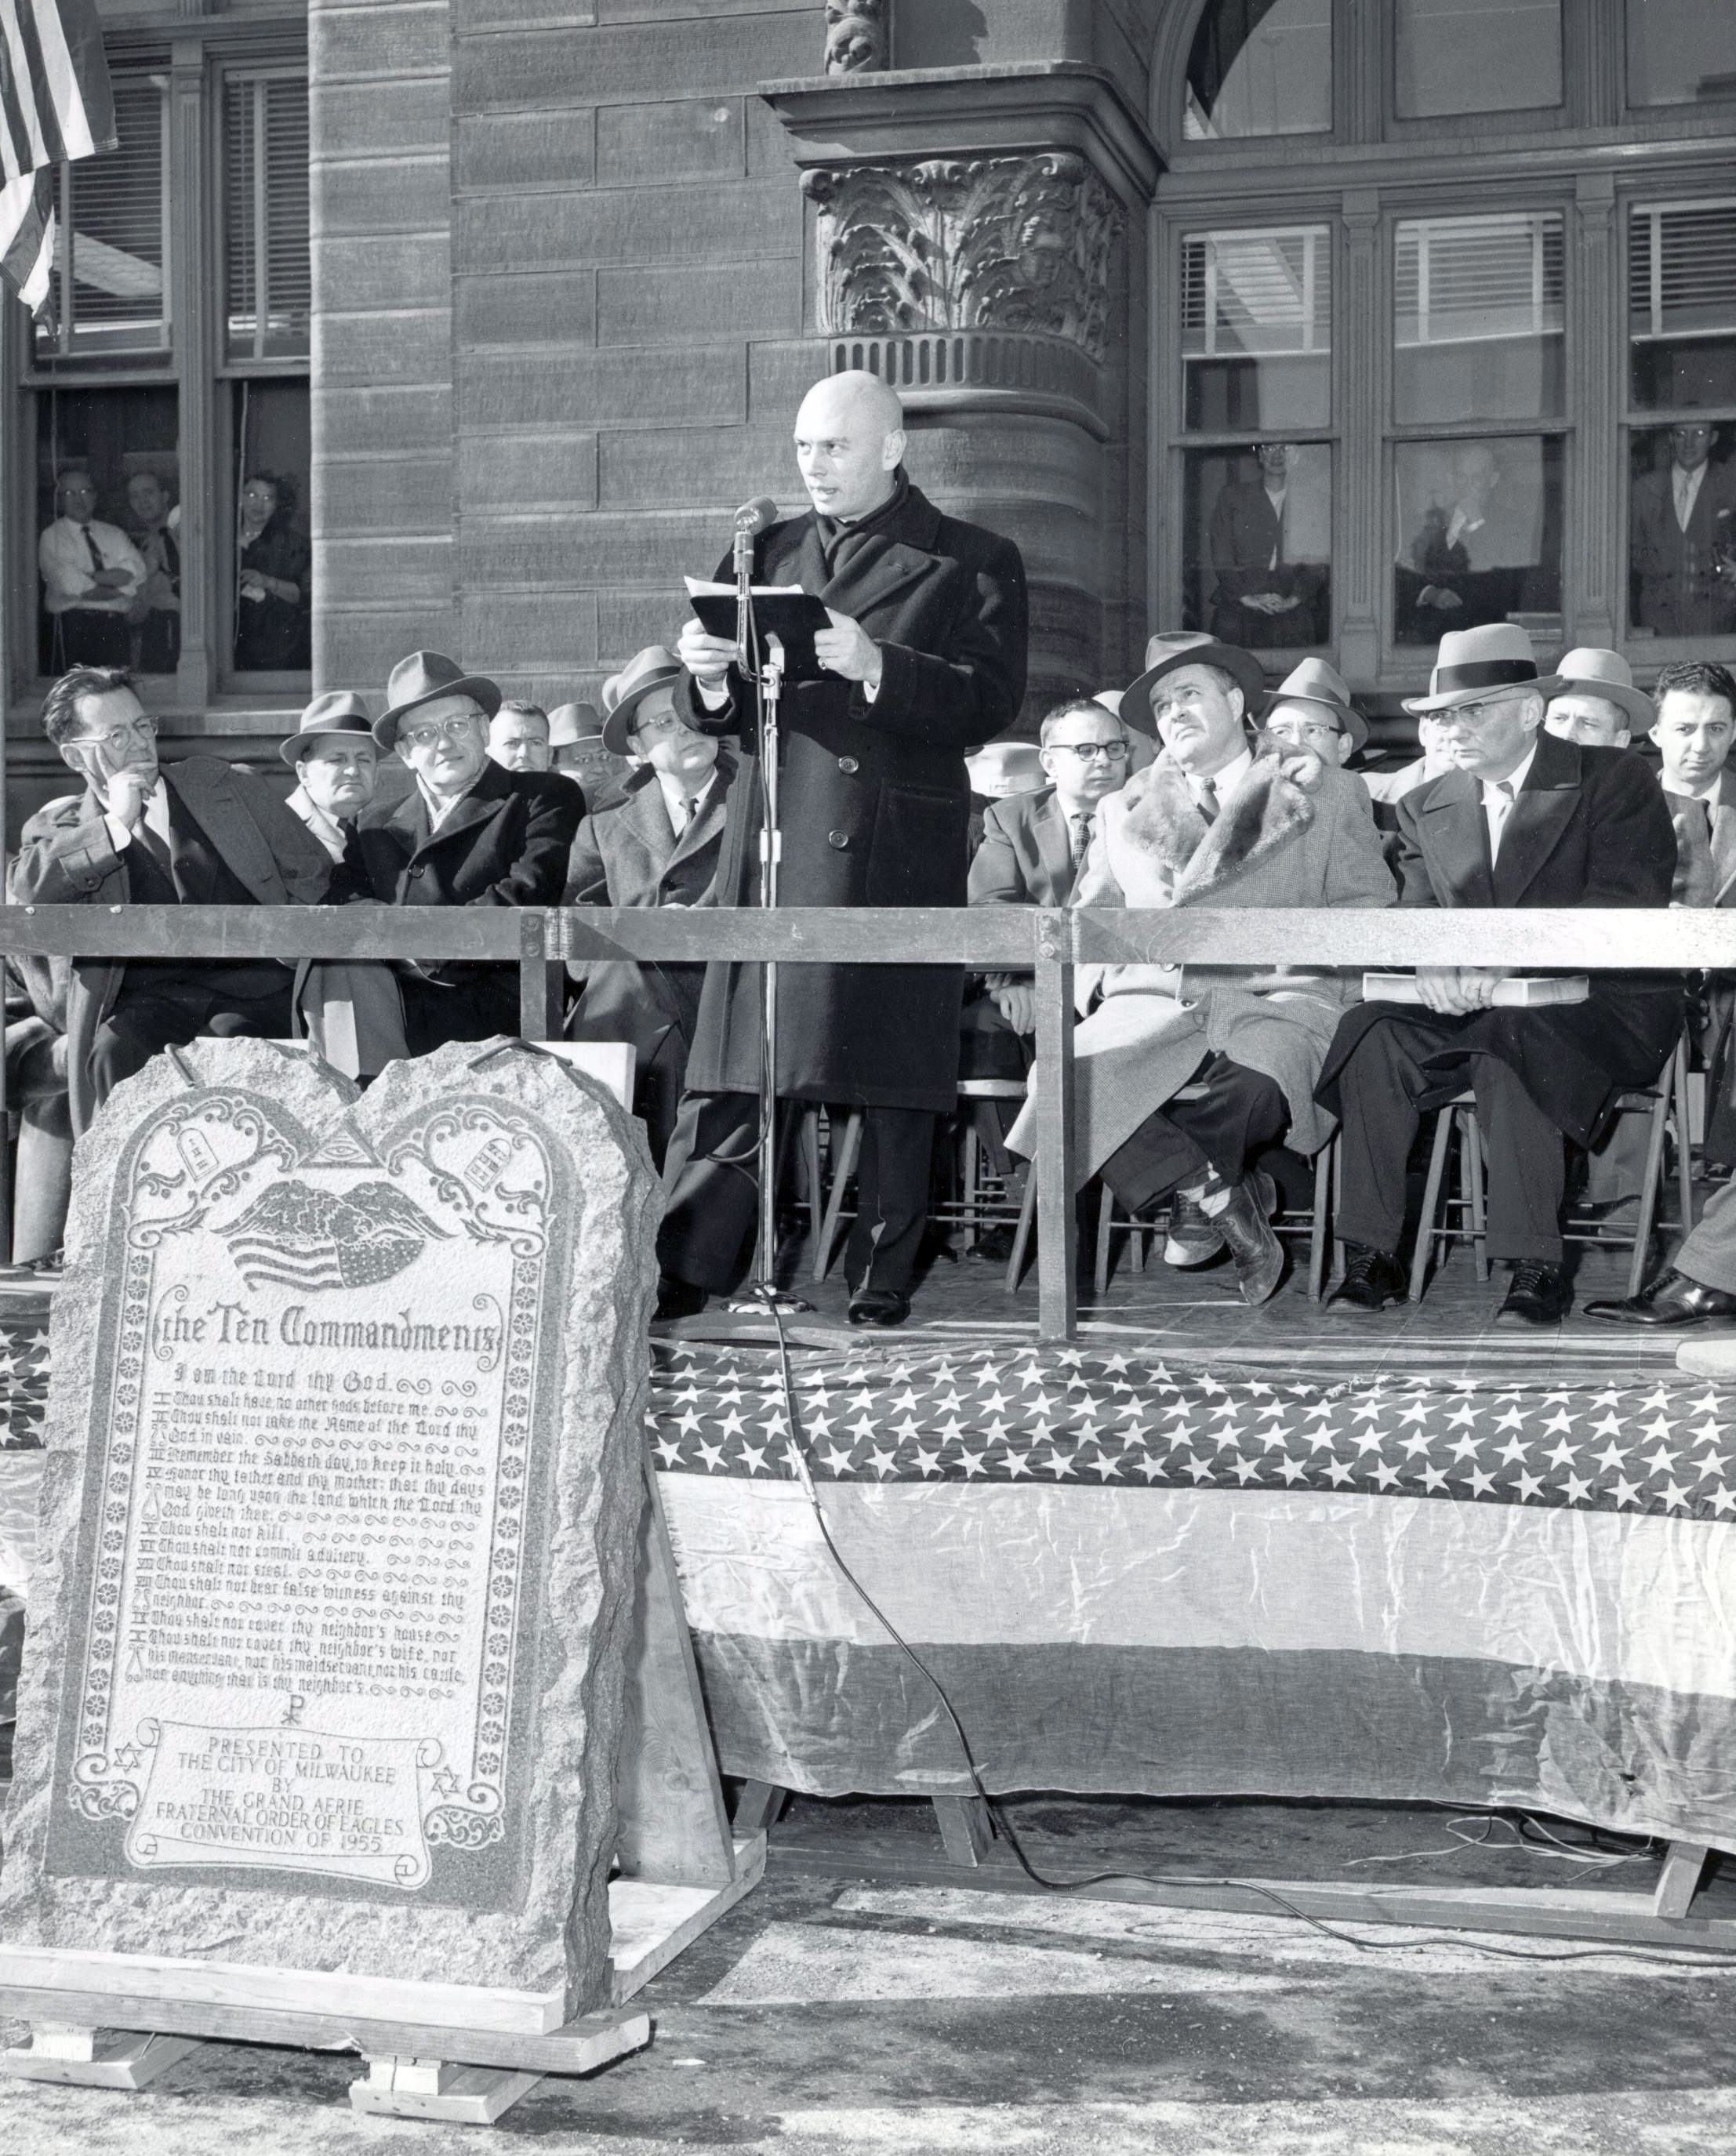 Actor Yul Brenner, co-star of The Ten Commandments film, at dedication of F.O.E. Ten Commandents monument in Milwaukee, WI, 1955.